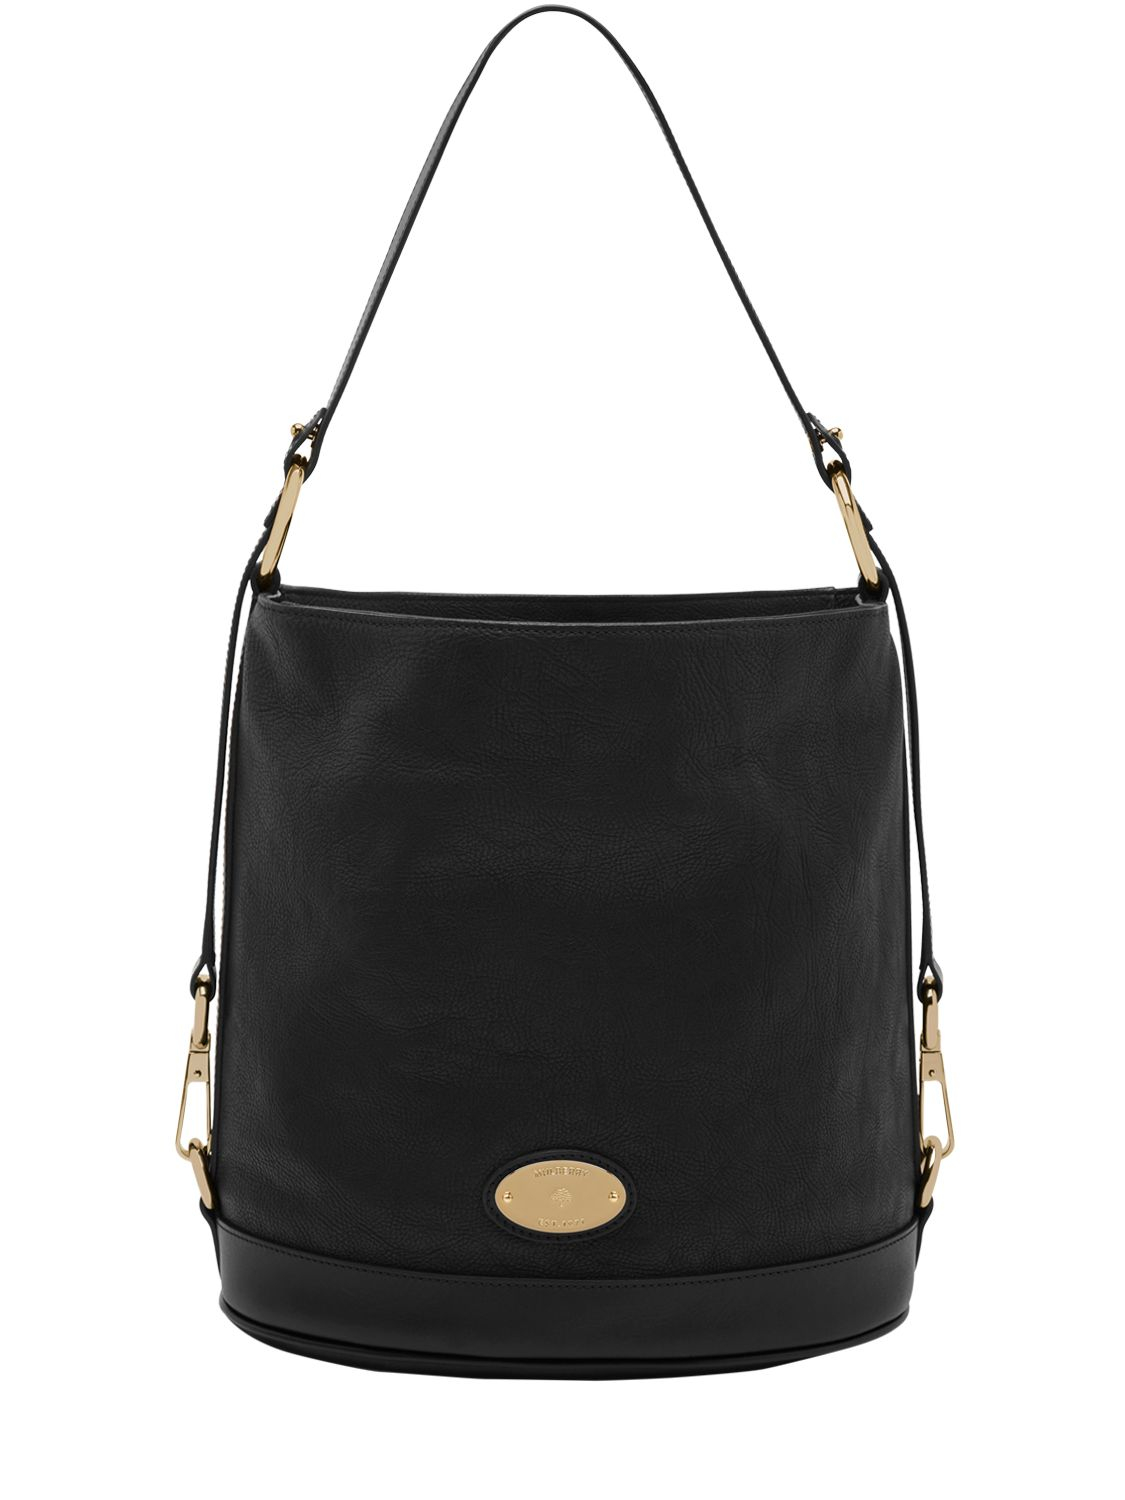 Lyst - Mulberry Jamie Washed Leather Bucket Bag in Black